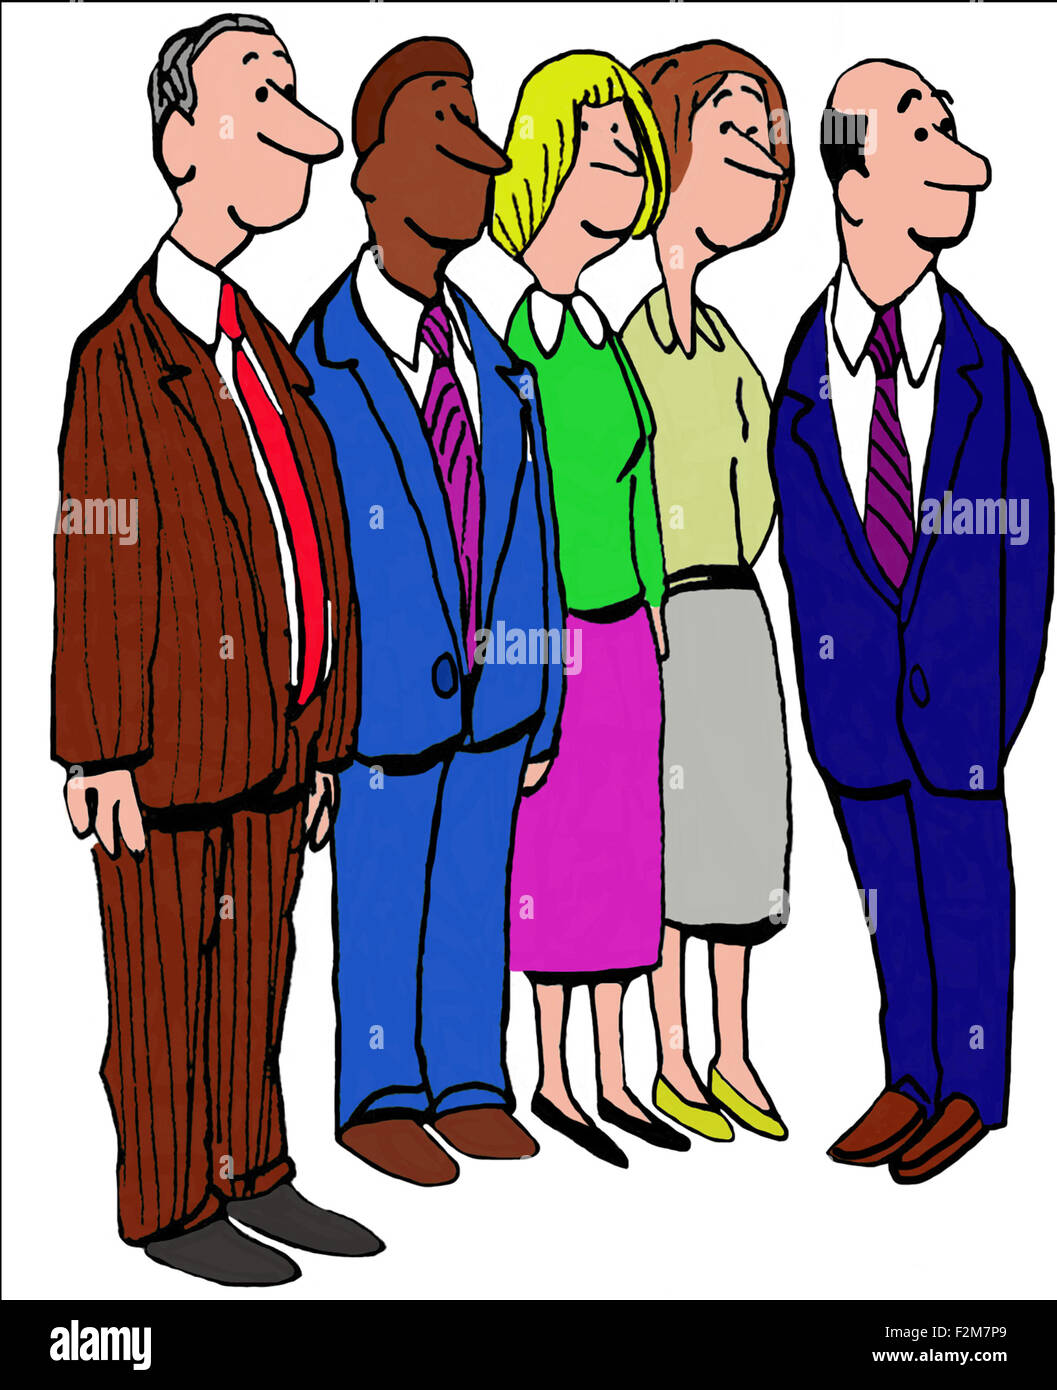 Business illustration showing full bodies of five smiling, diverse businesspeople. Stock Photo